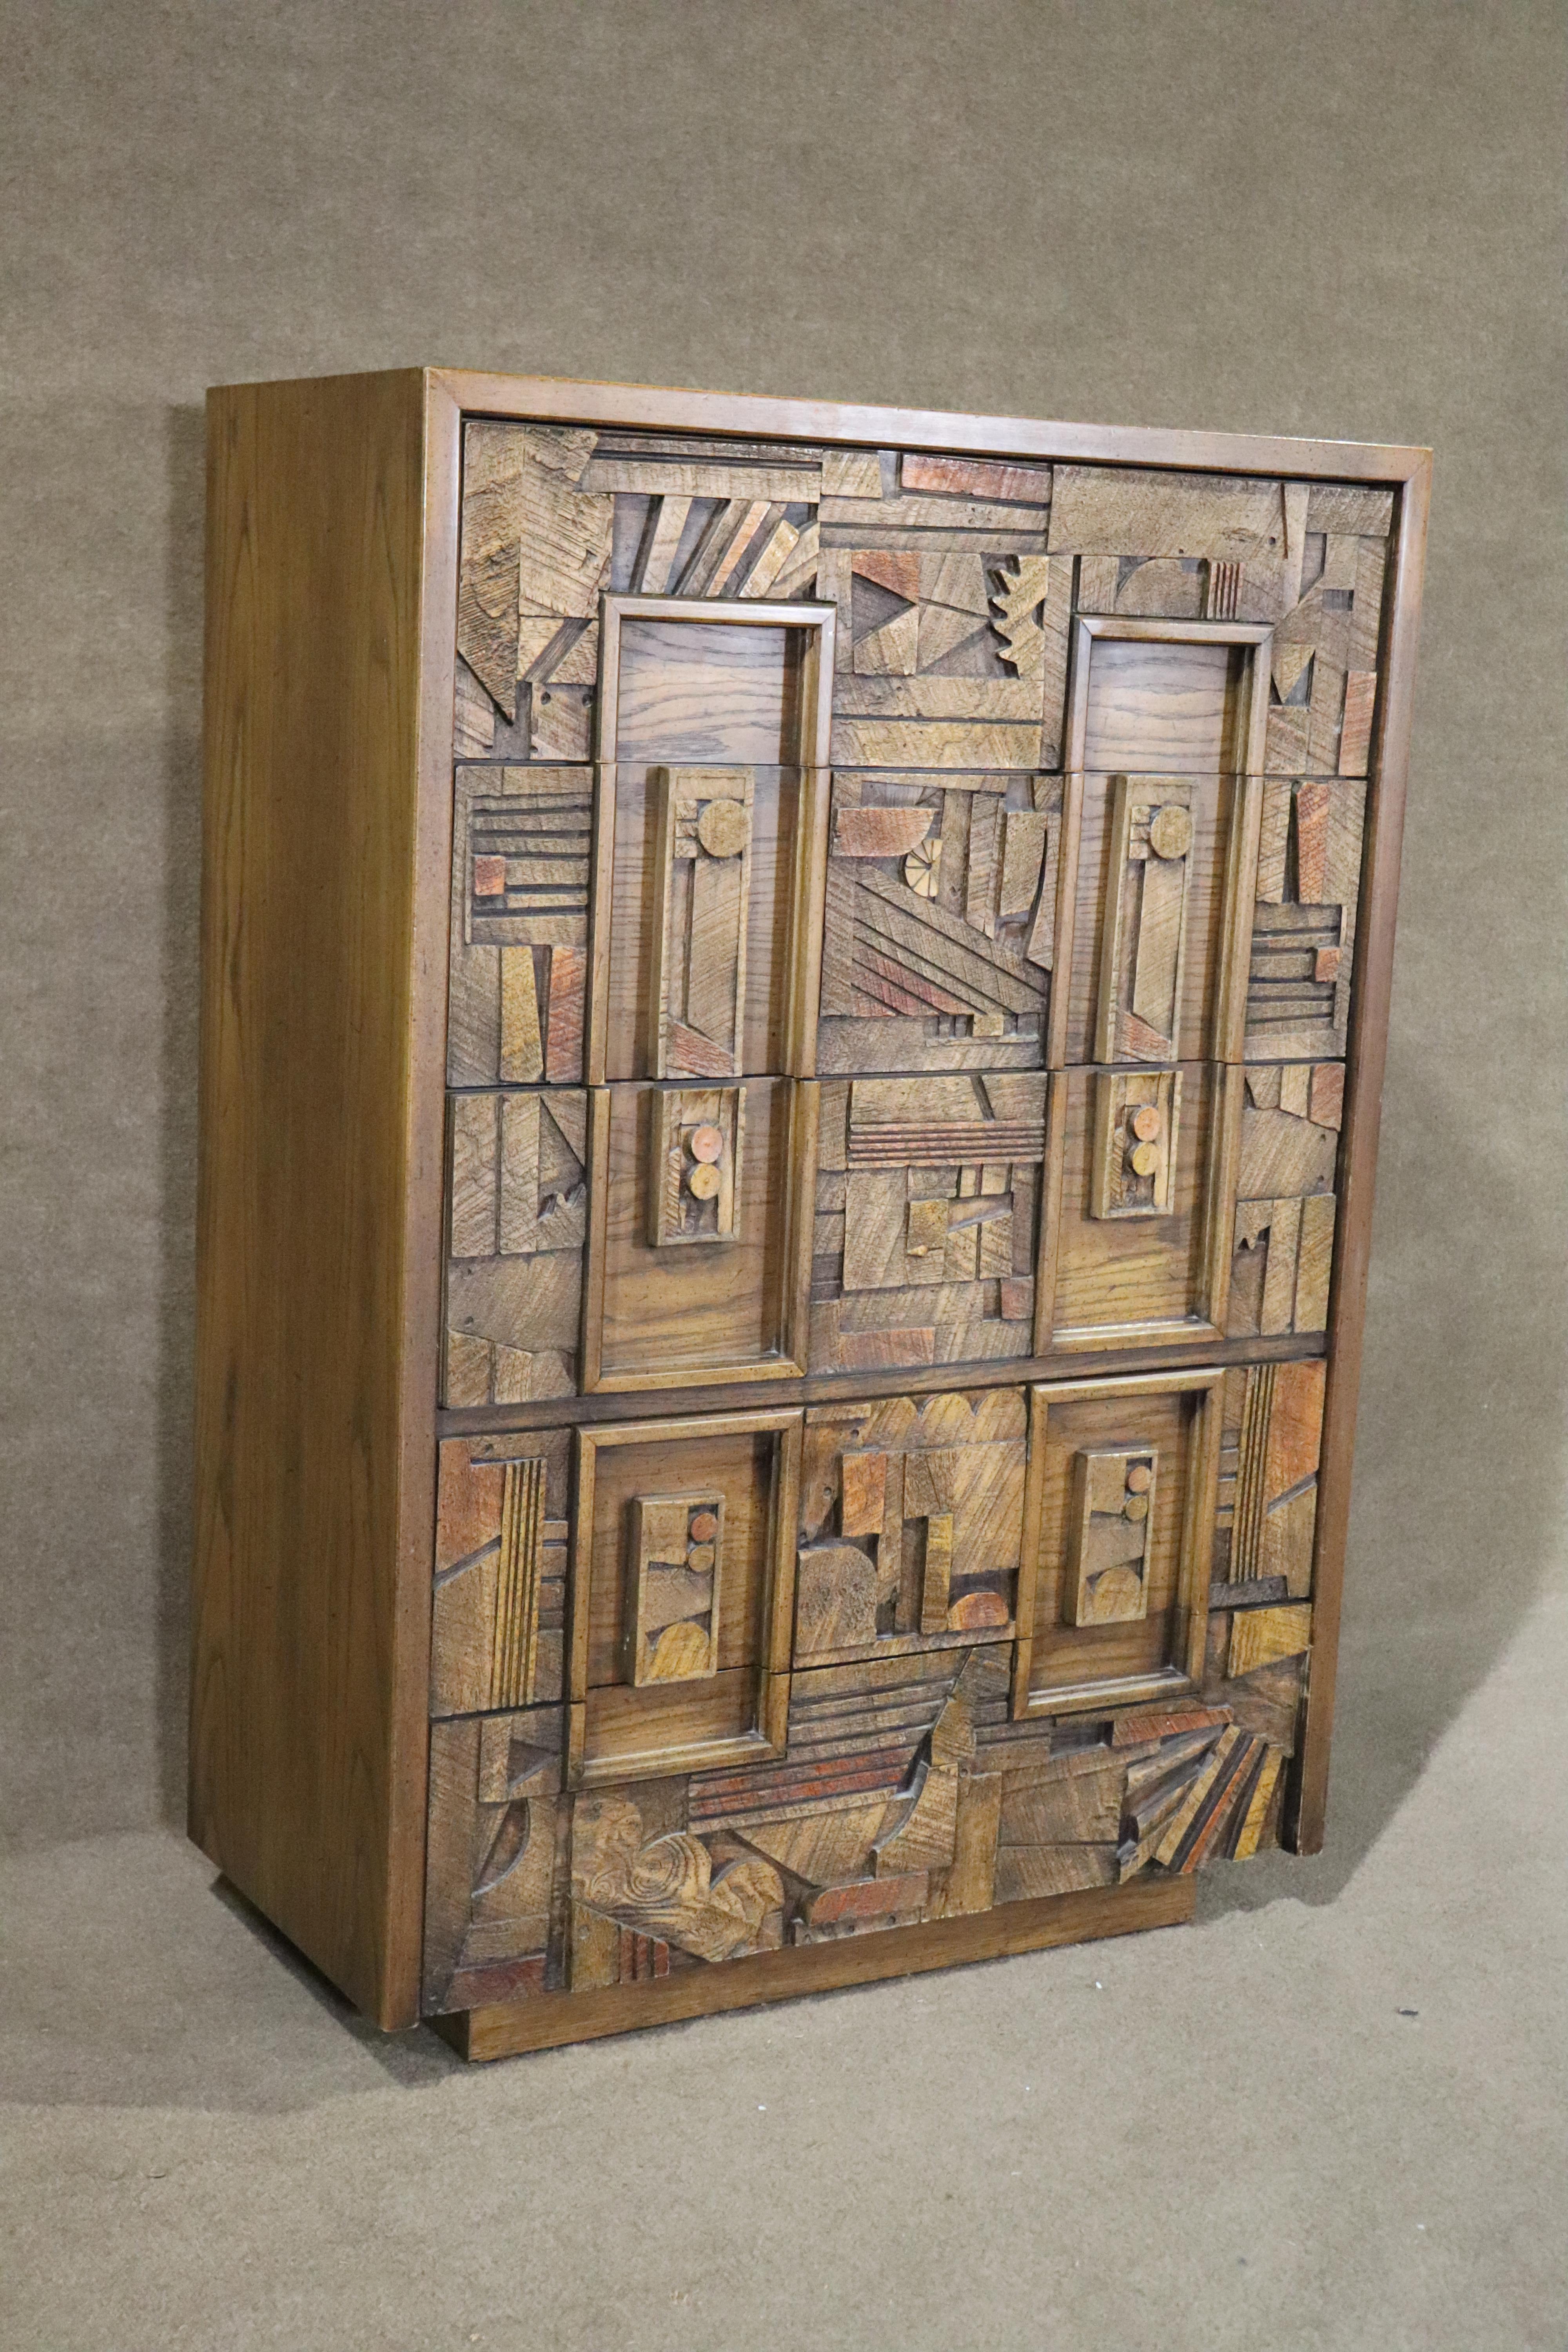 Mid-century modern chest of drawers by Lane in a stunning brutalist style. Pieces of wood are arranged in a mosaic fashion across the front of each drawer. Five wide and deep drawers give ample bedroom storage.
Please confirm location NY or NJ